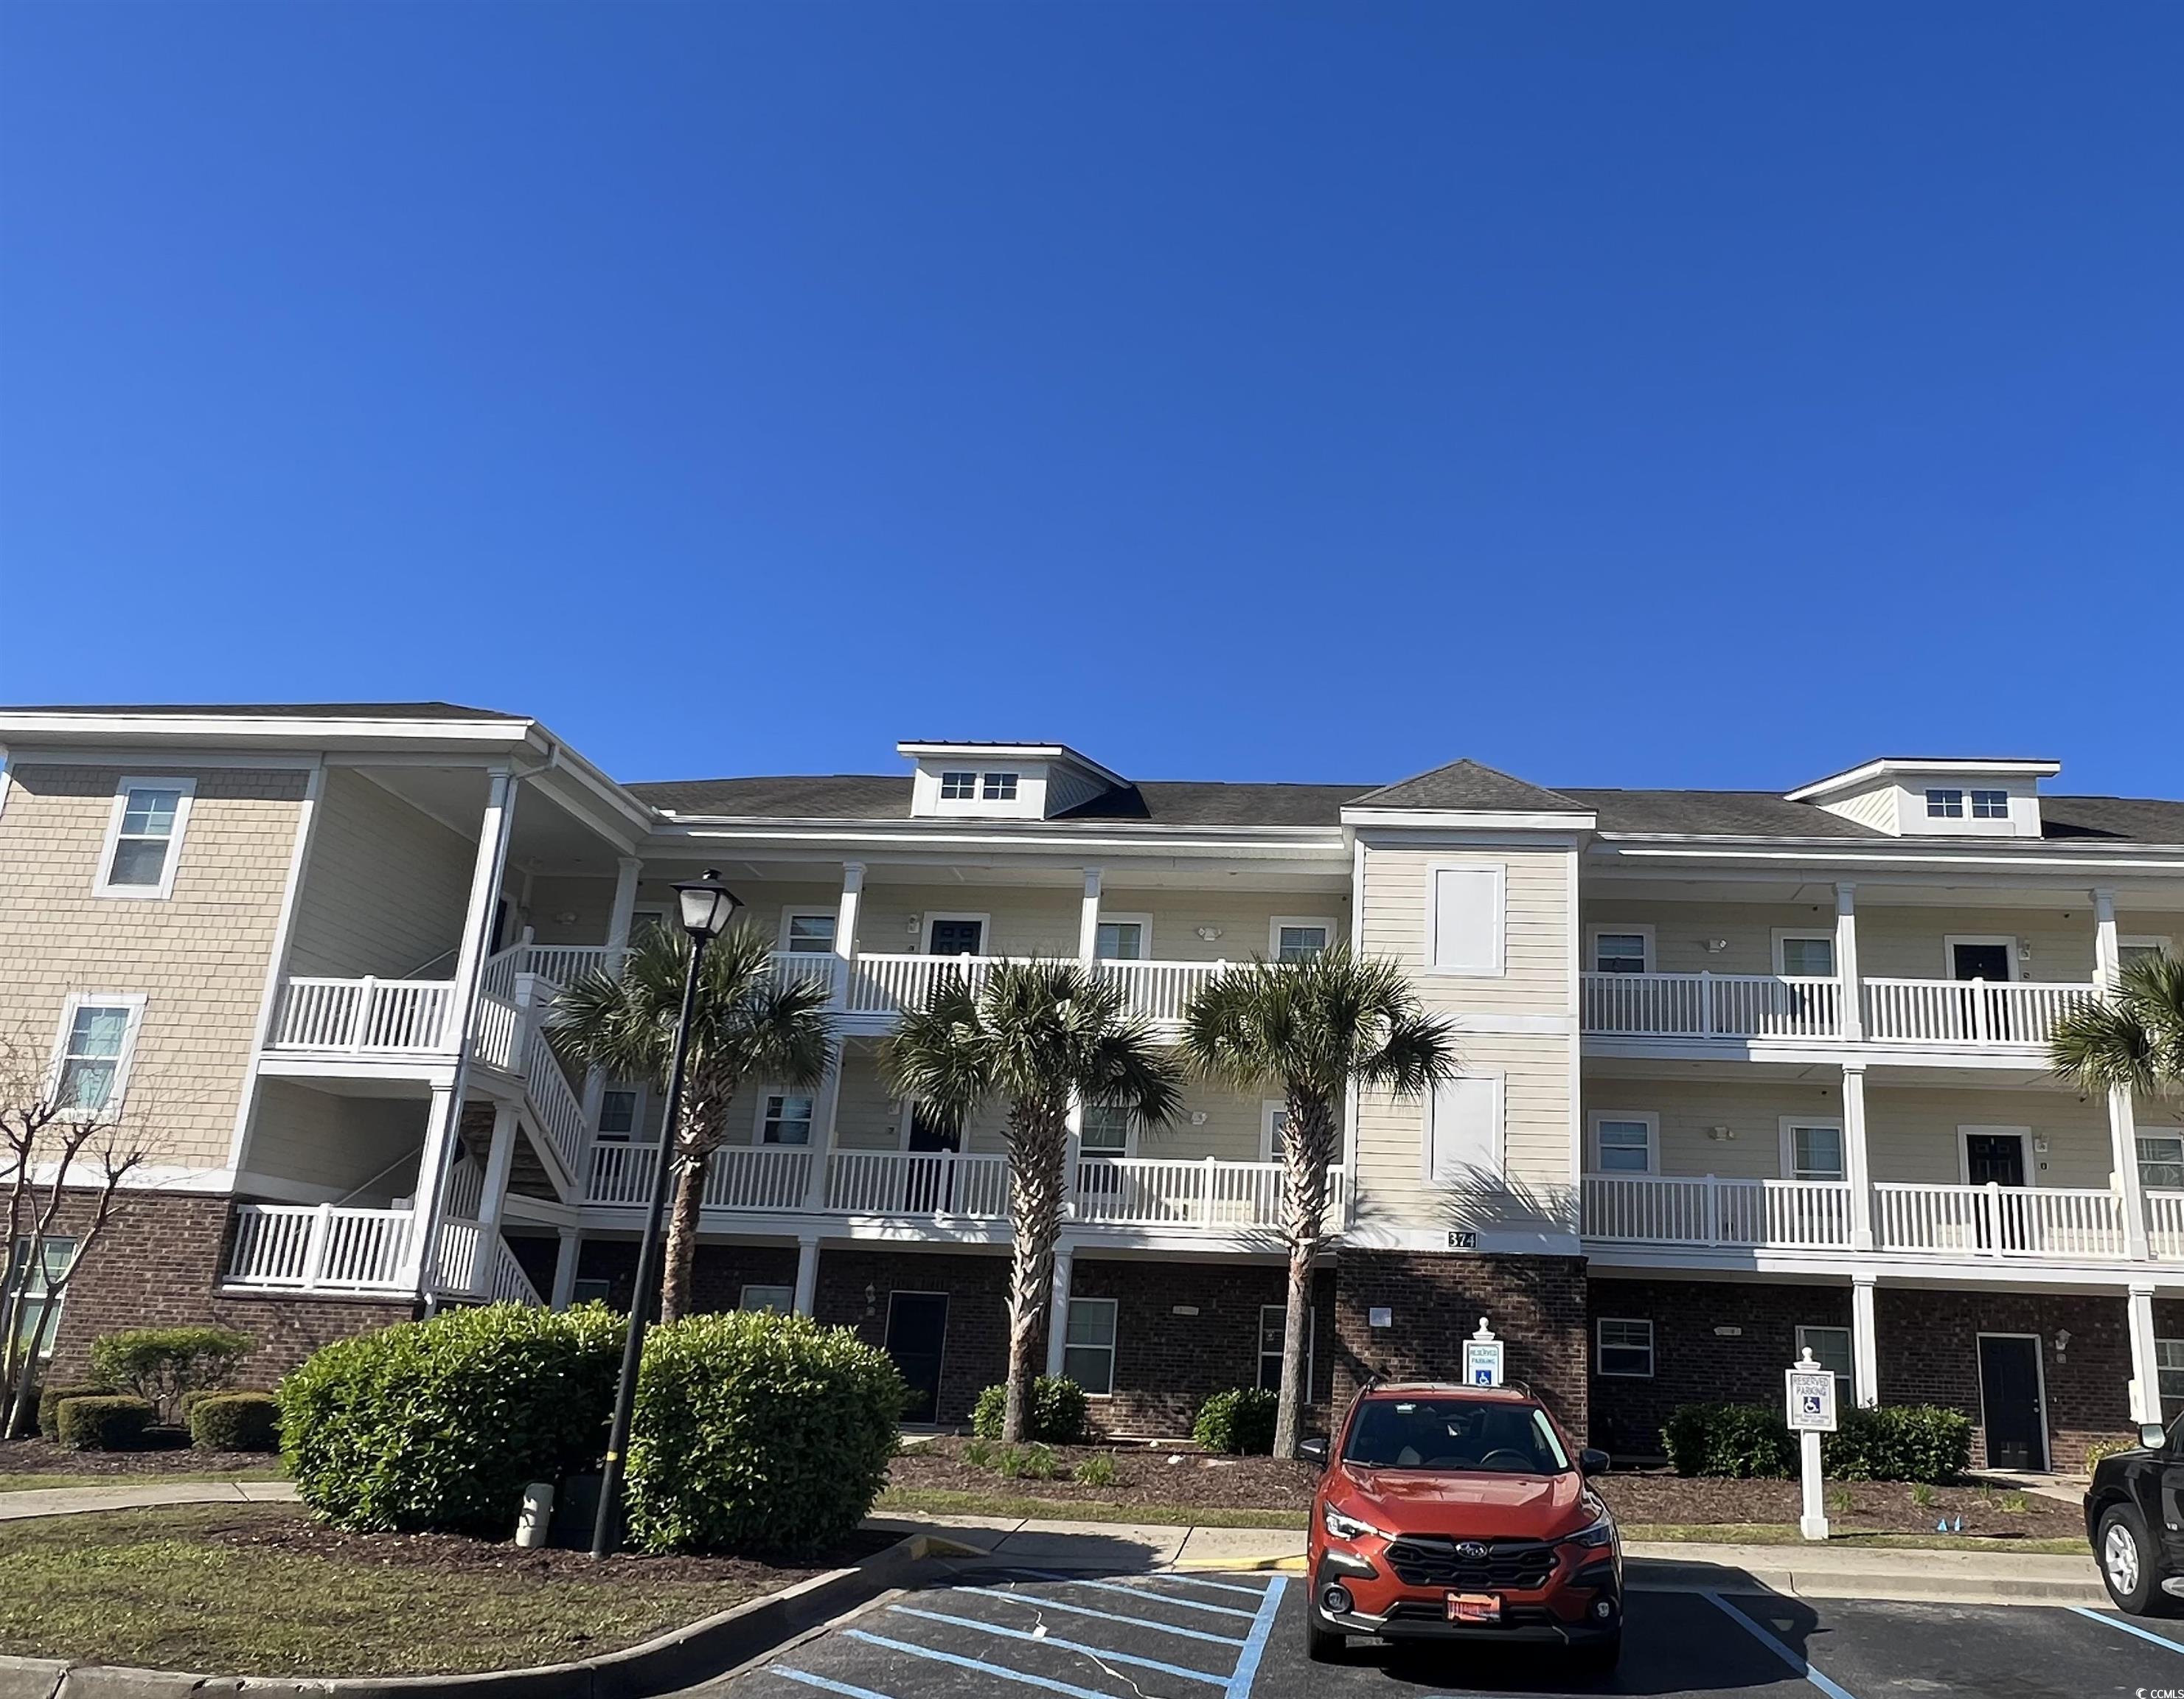 immaculate two bedroom, two bath condo in the community of kiskadee at wild wing.  this second floor unit overlooks a pond with a fountain for relaxing moments on your rear balcony.  spacious kitchen which overlooks the dining and living area.  washer/dryer included in unit as well.